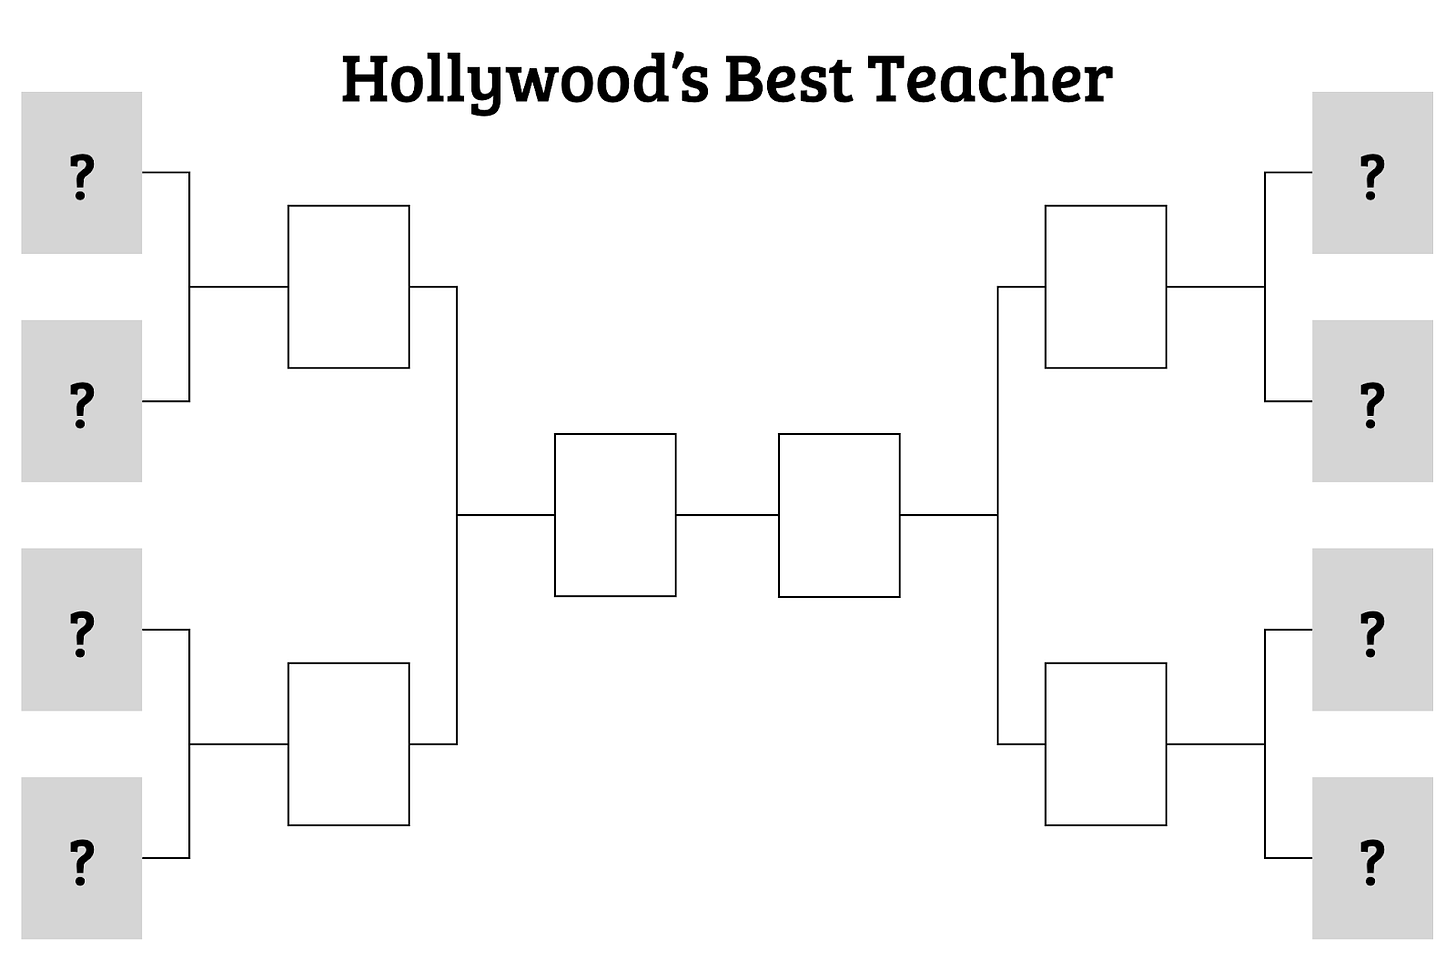 An image of a bracket style competition with "Hollywood's Best Teacher" at the top.